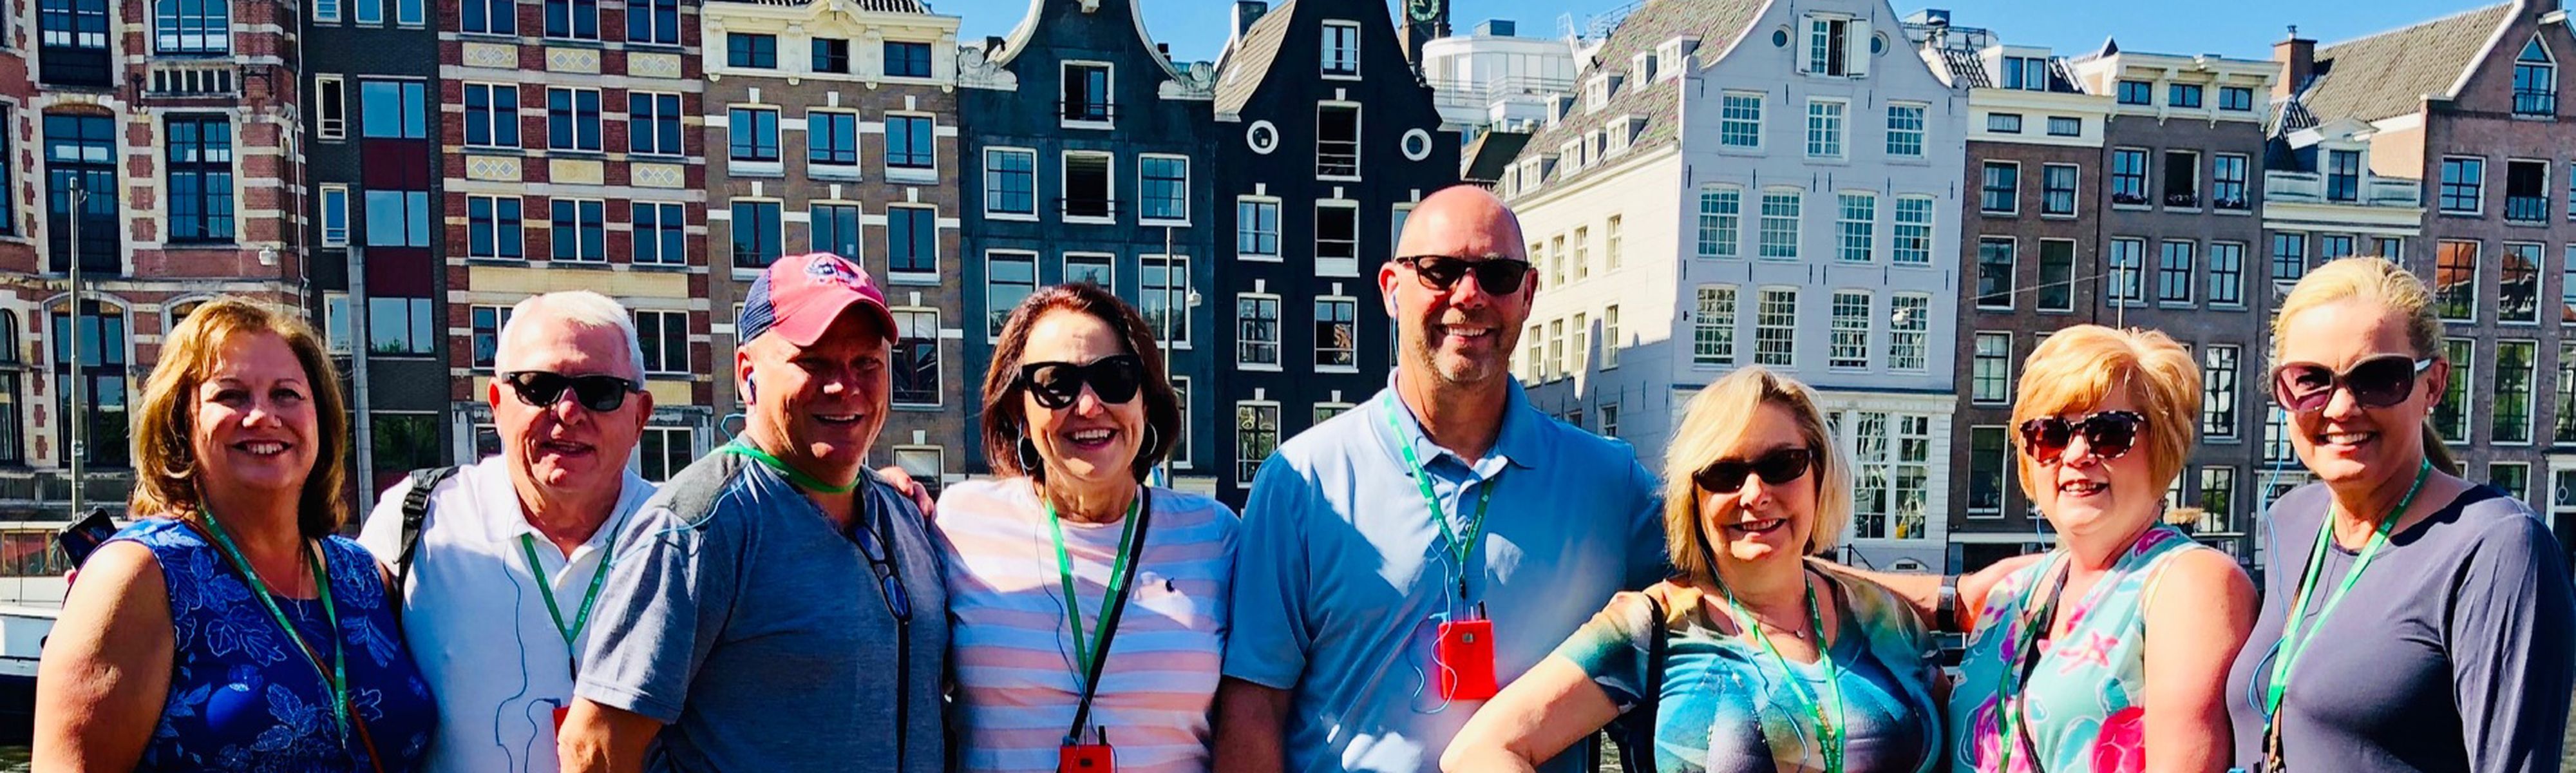 group of travelers in front of colorful homes in amsterdam